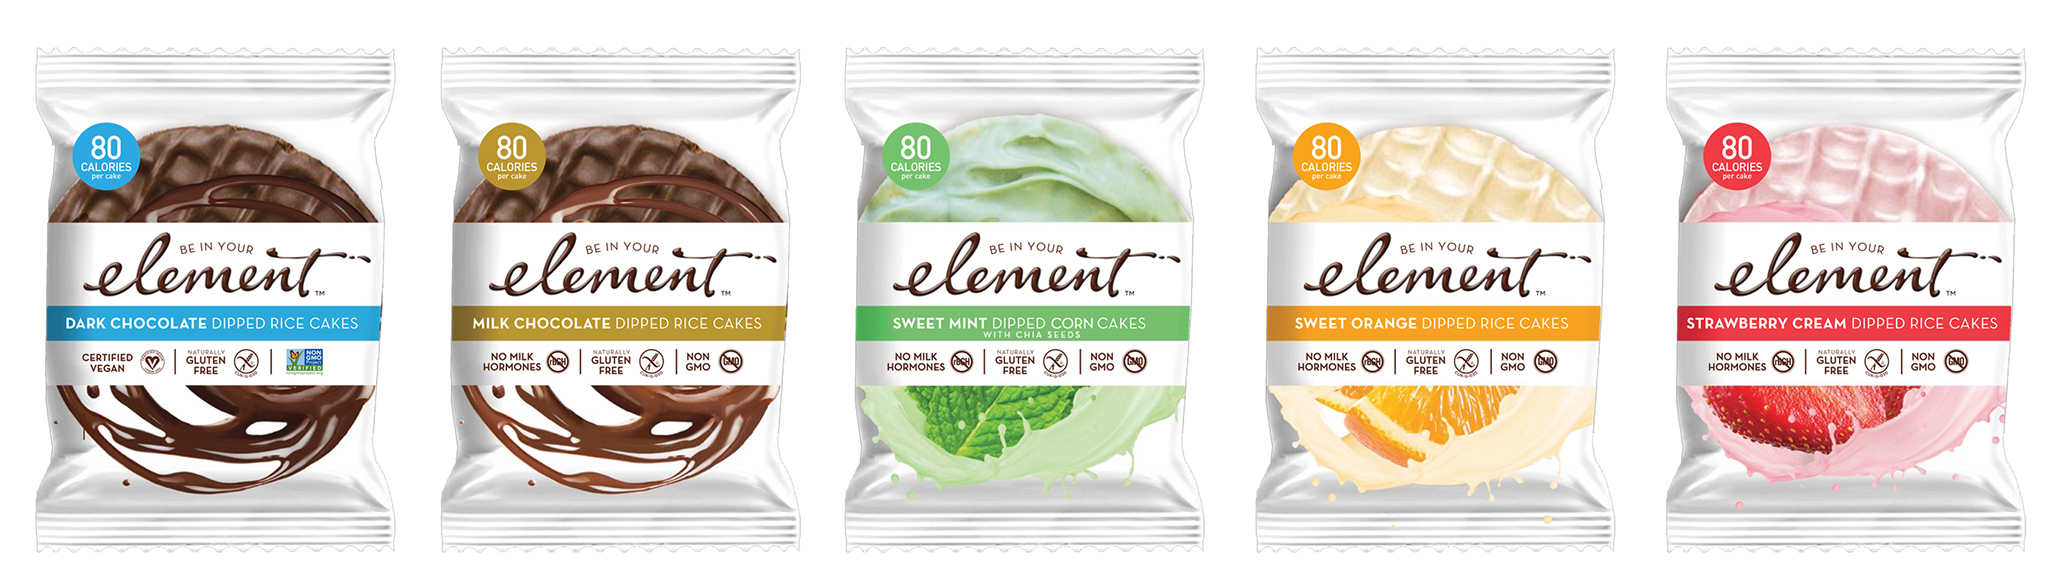 Element snacks come in a variety of flavors. Photograph courtesy of Element.